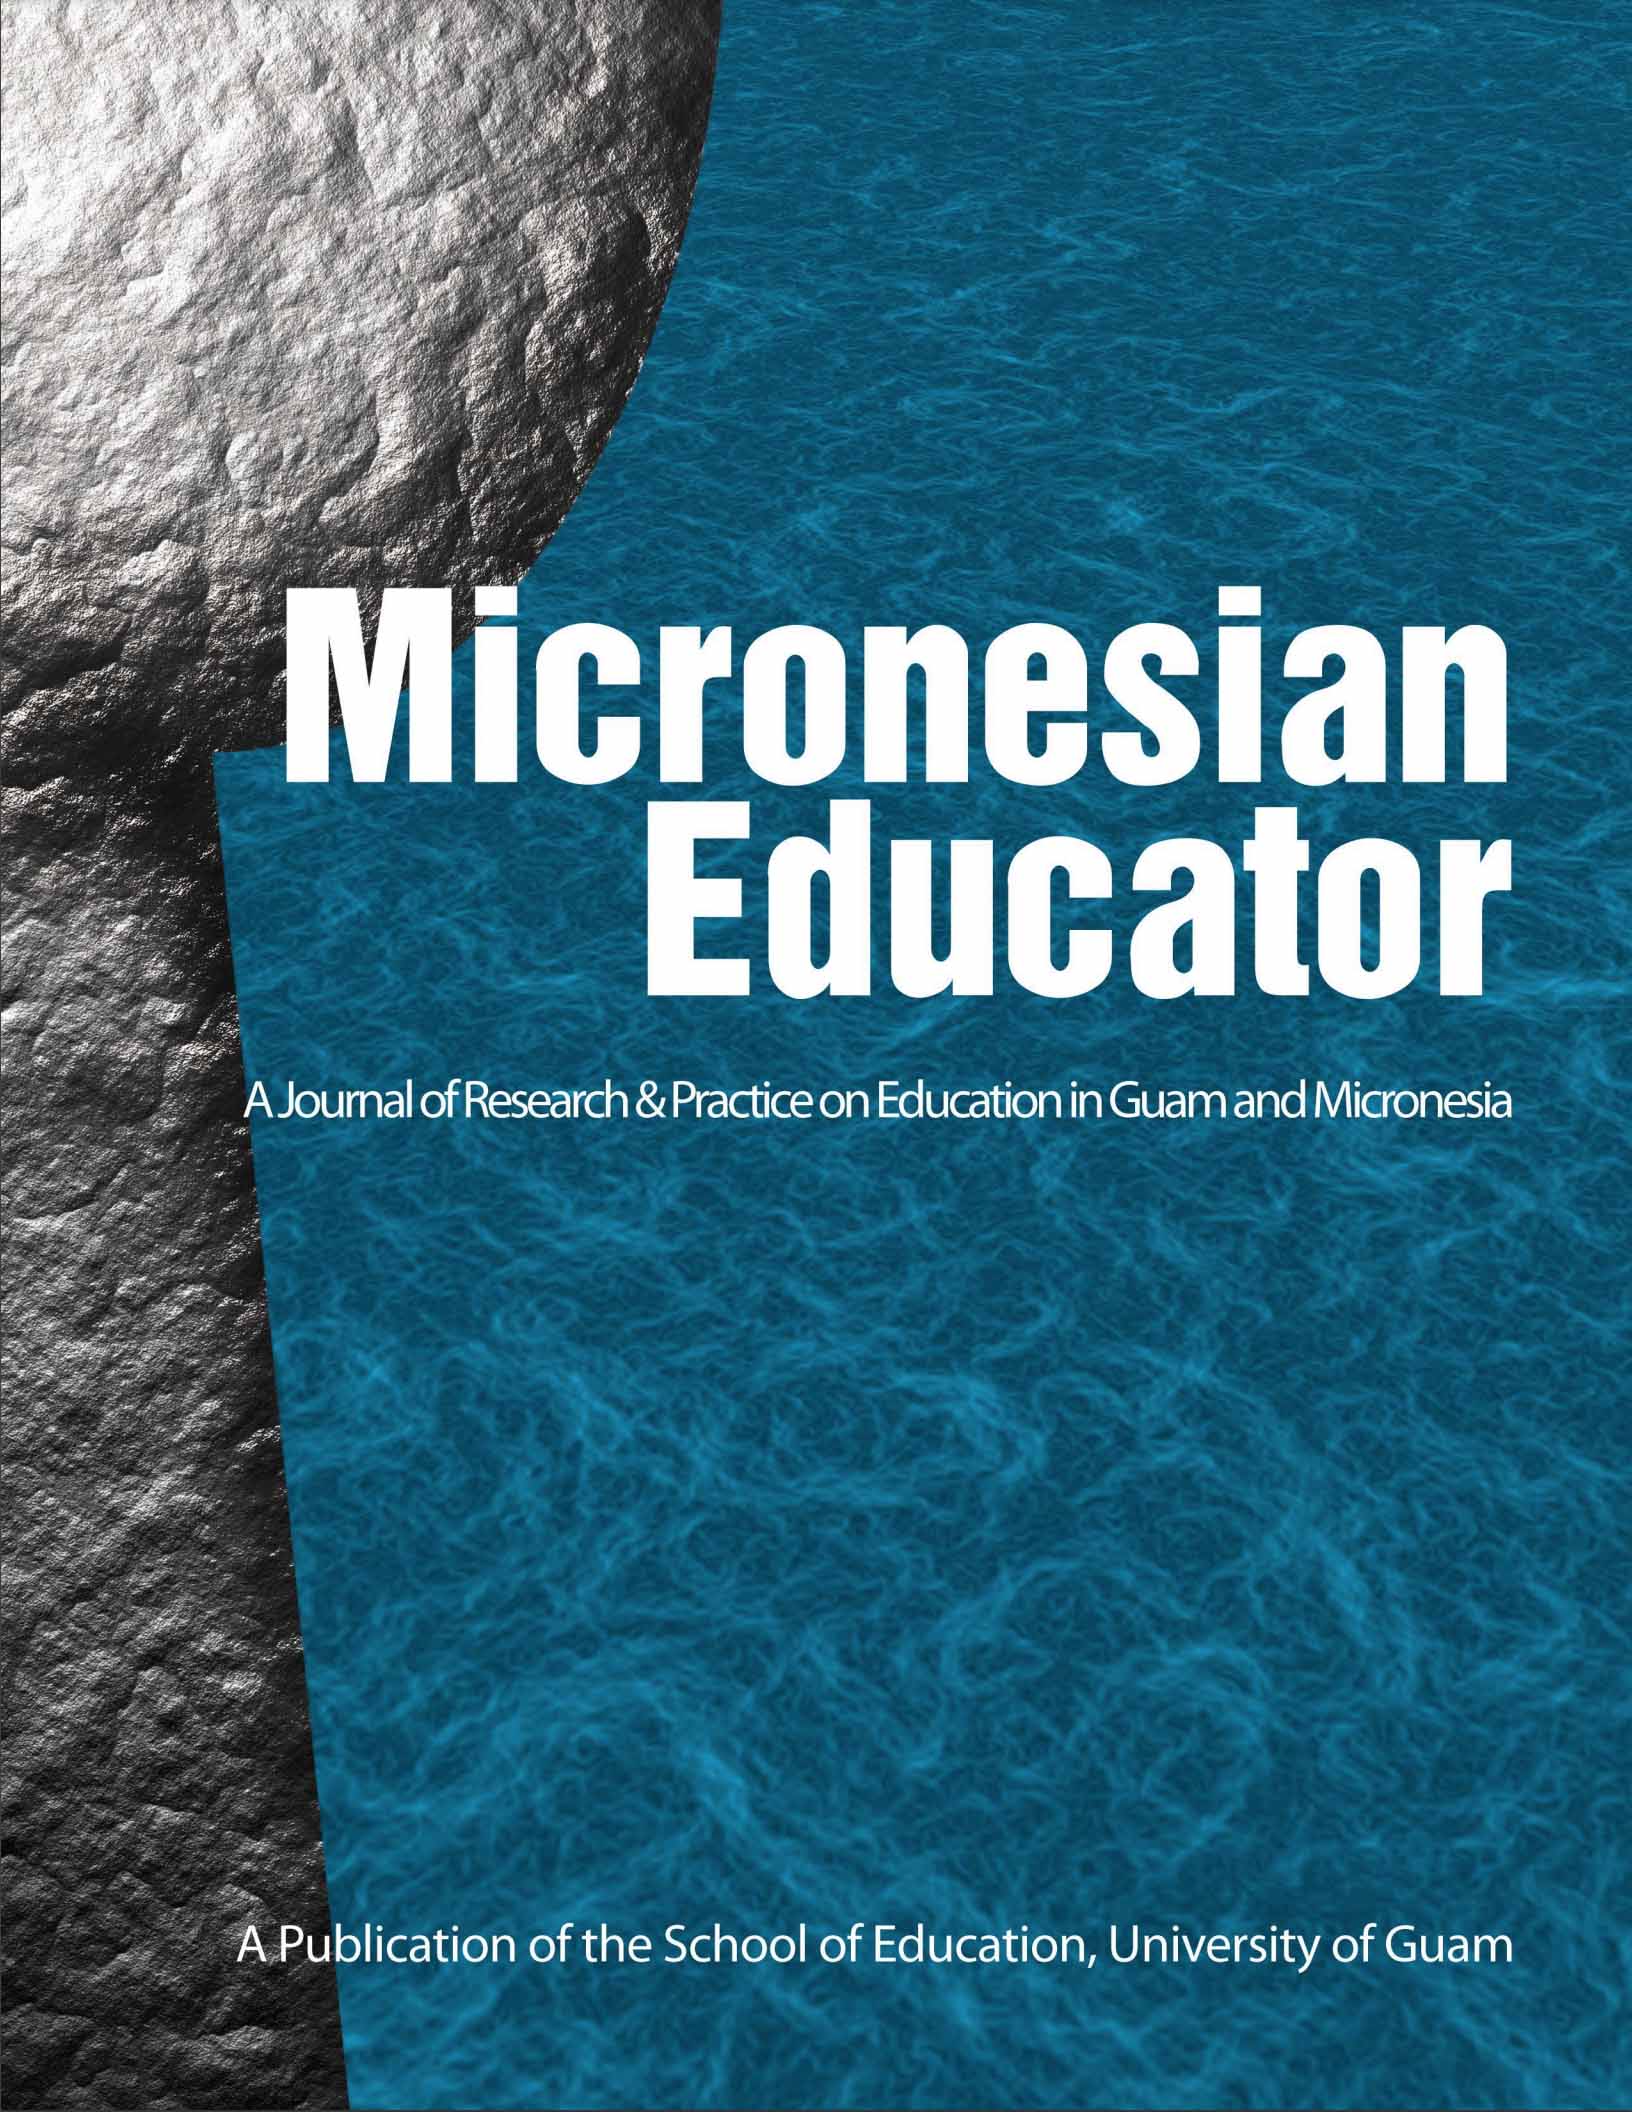 Photo of the Micronesian Educators journal cover